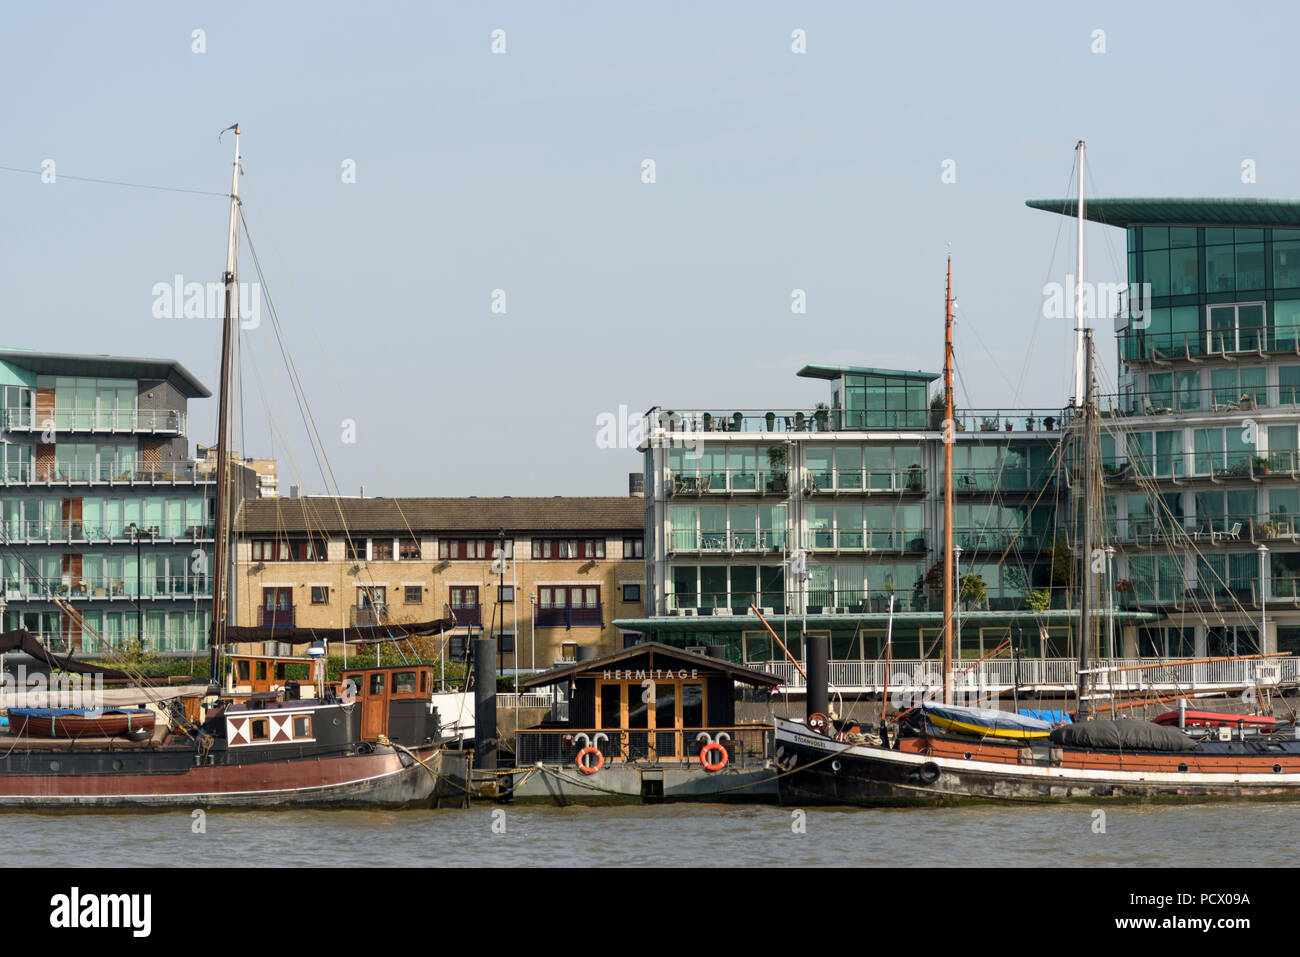 12-10-2017 London, UK. The Hermitaage Community Moorings on the River Thames at Wapping. Photo: © Simon Grosset Stock Photo